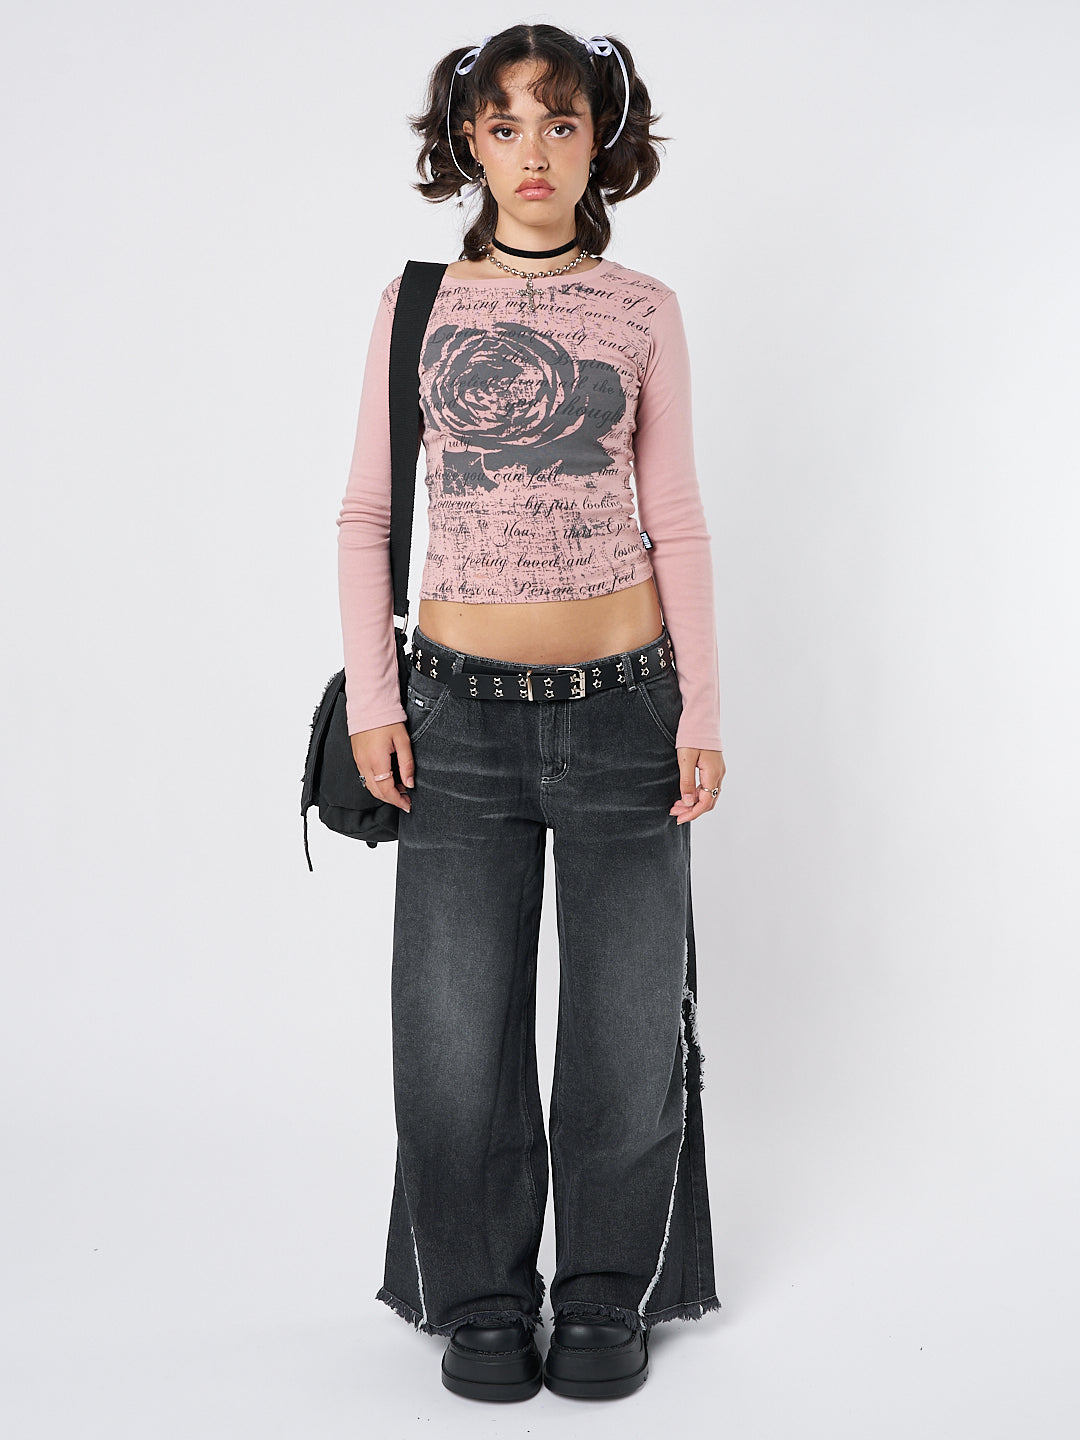 Lost Rose Pale Pink Graphic Top - Minga London